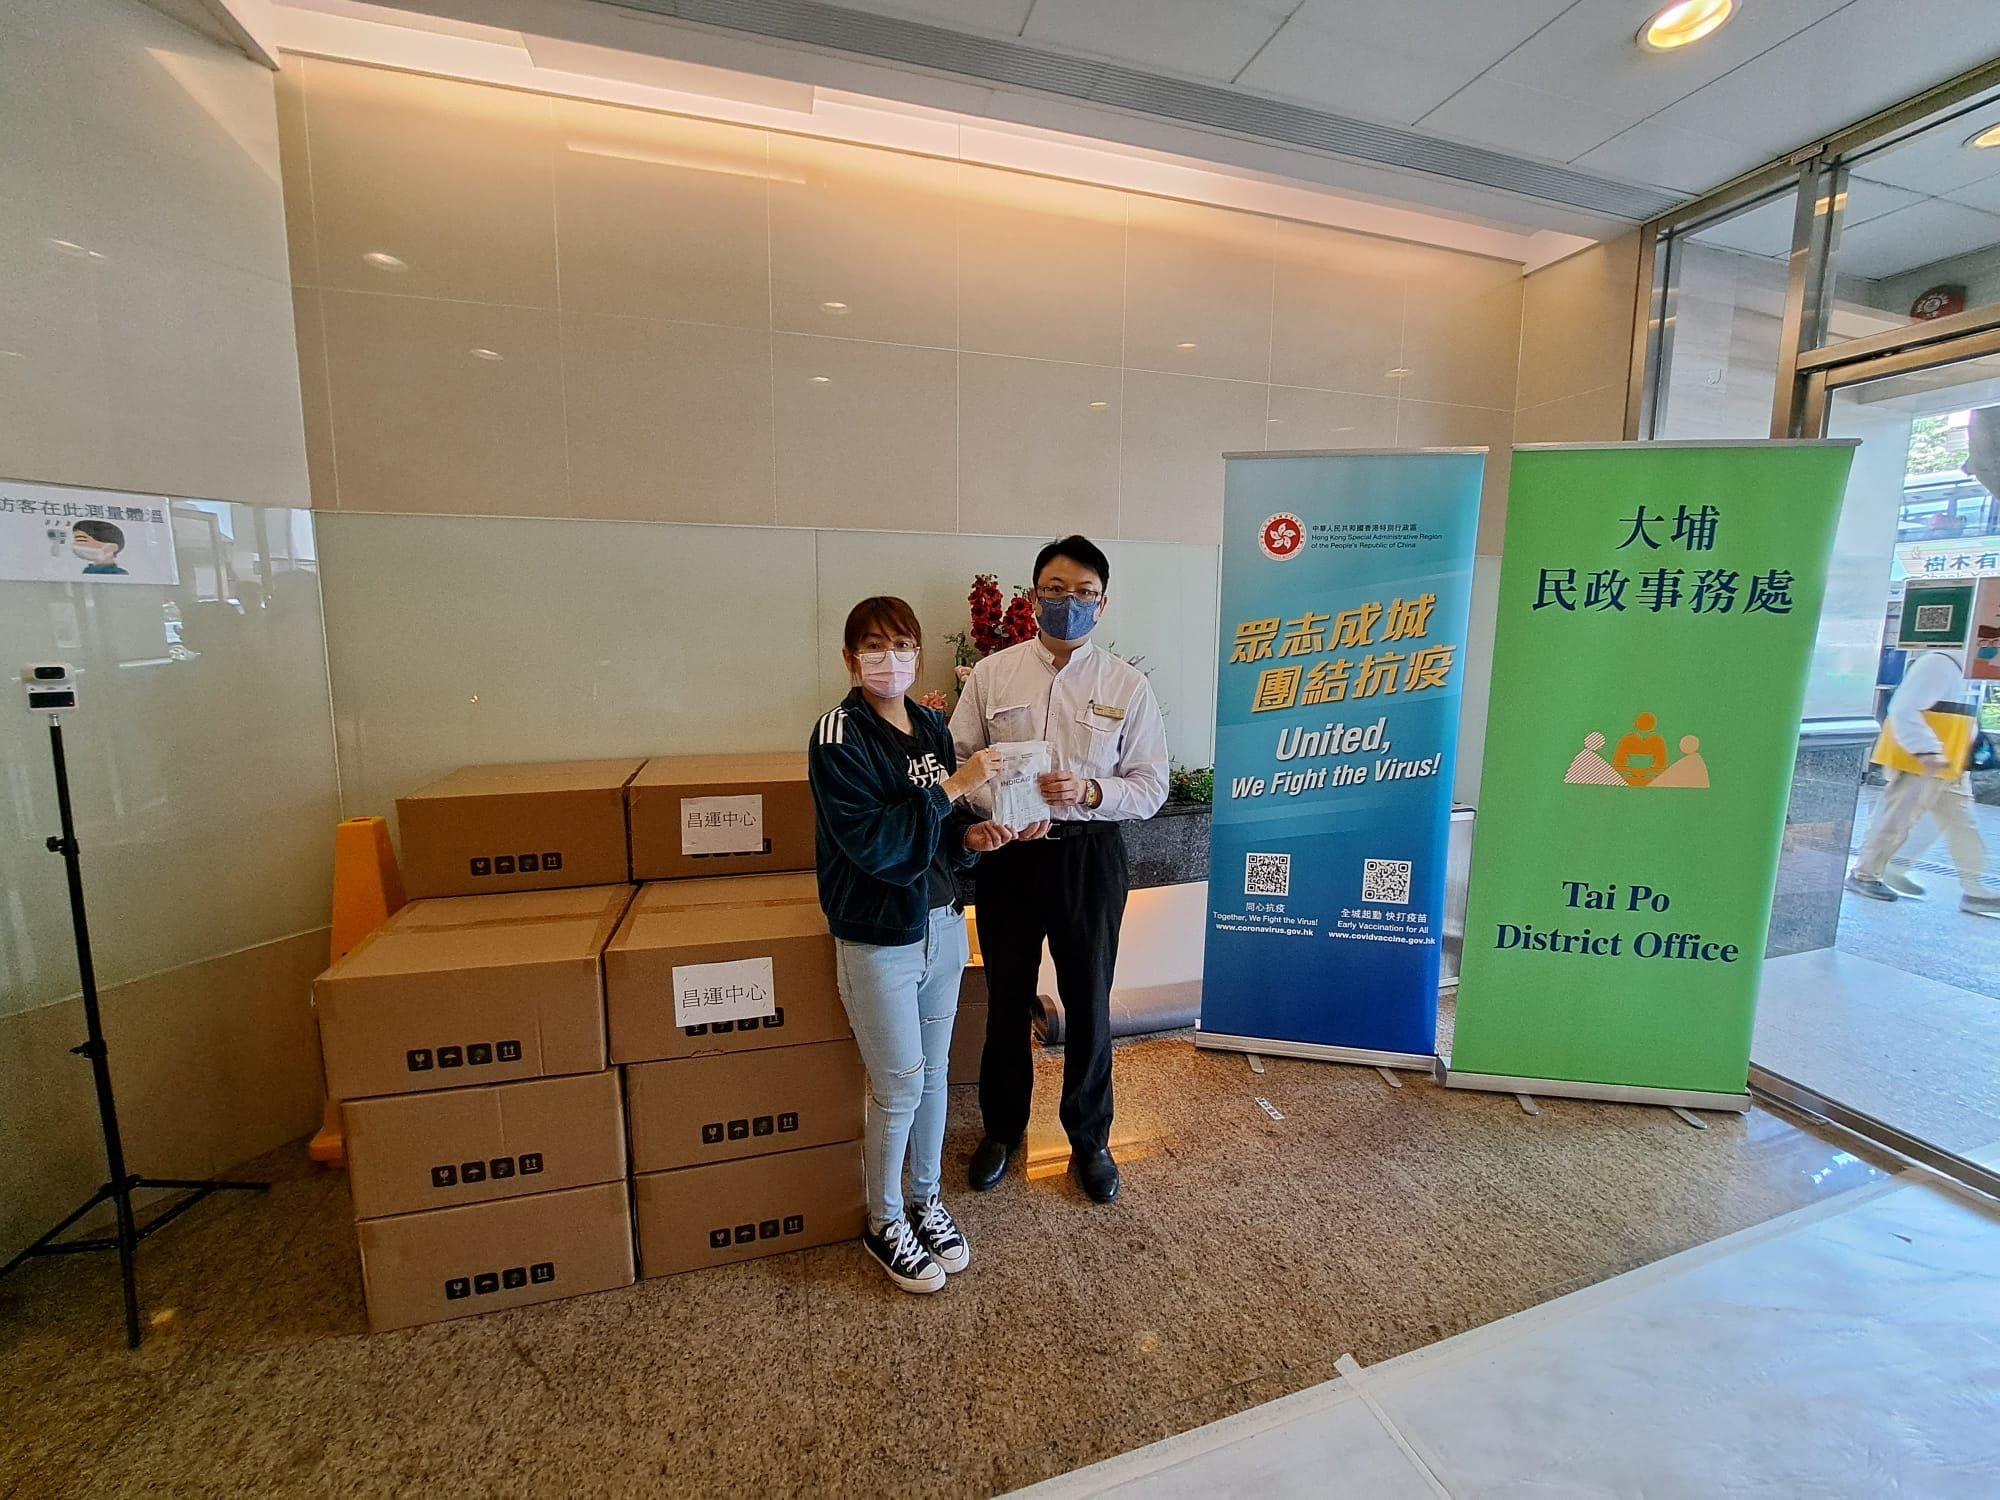 The Tai Po District Office today (April 20) distributed COVID-19 rapid test kits to households, cleansing workers and property management staff living and working in Fortune Plaza for voluntary testing through the property management company.